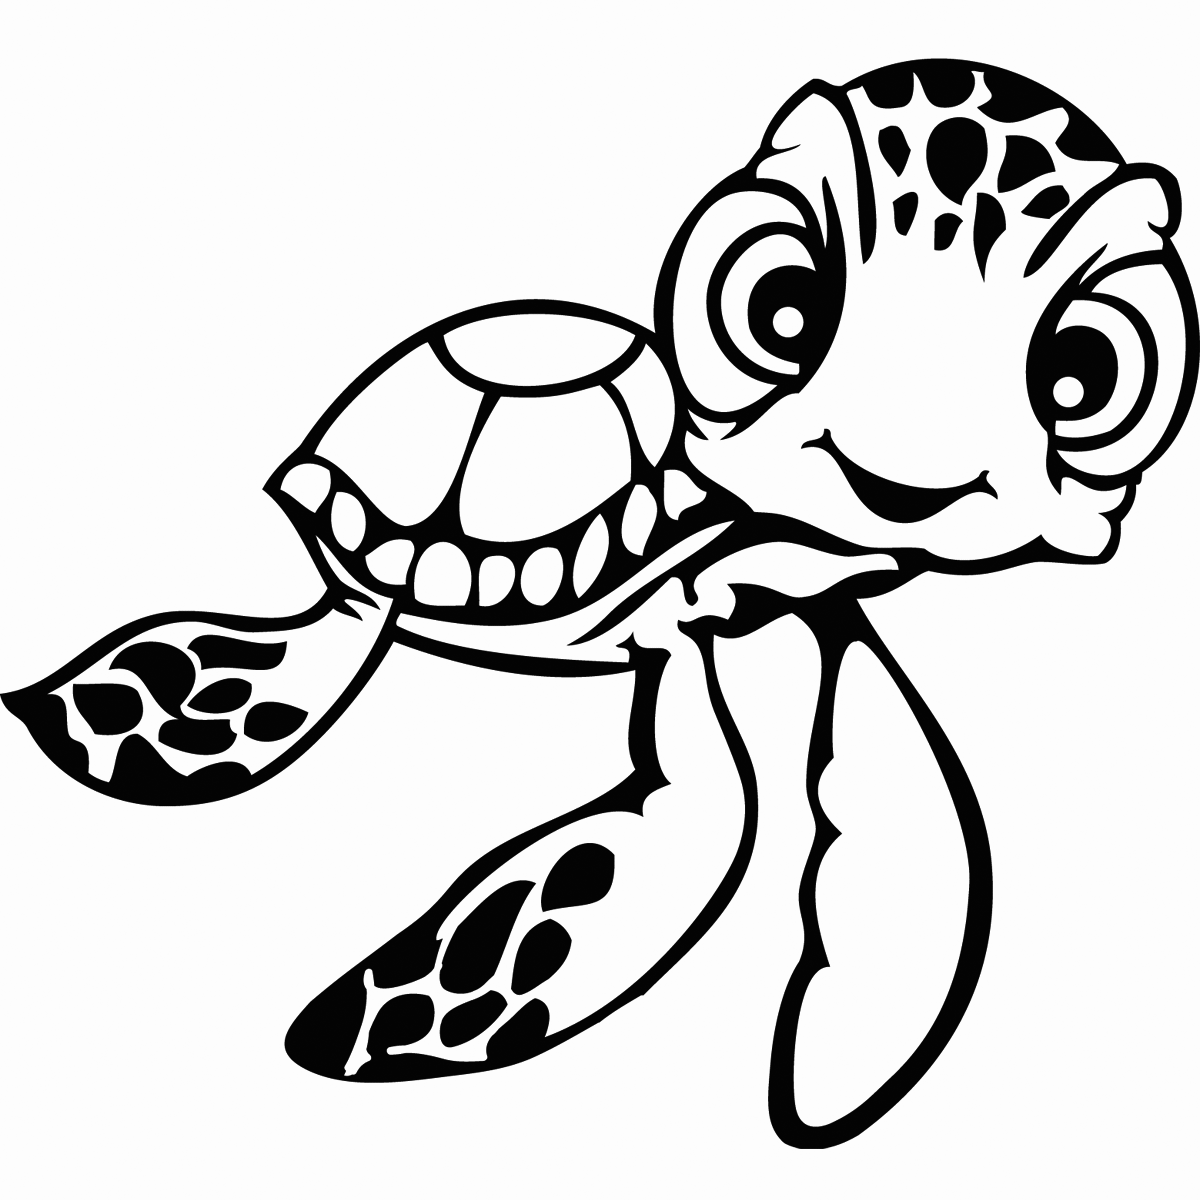 Reptile Coloring Pages Best Coloring Pages For Kids